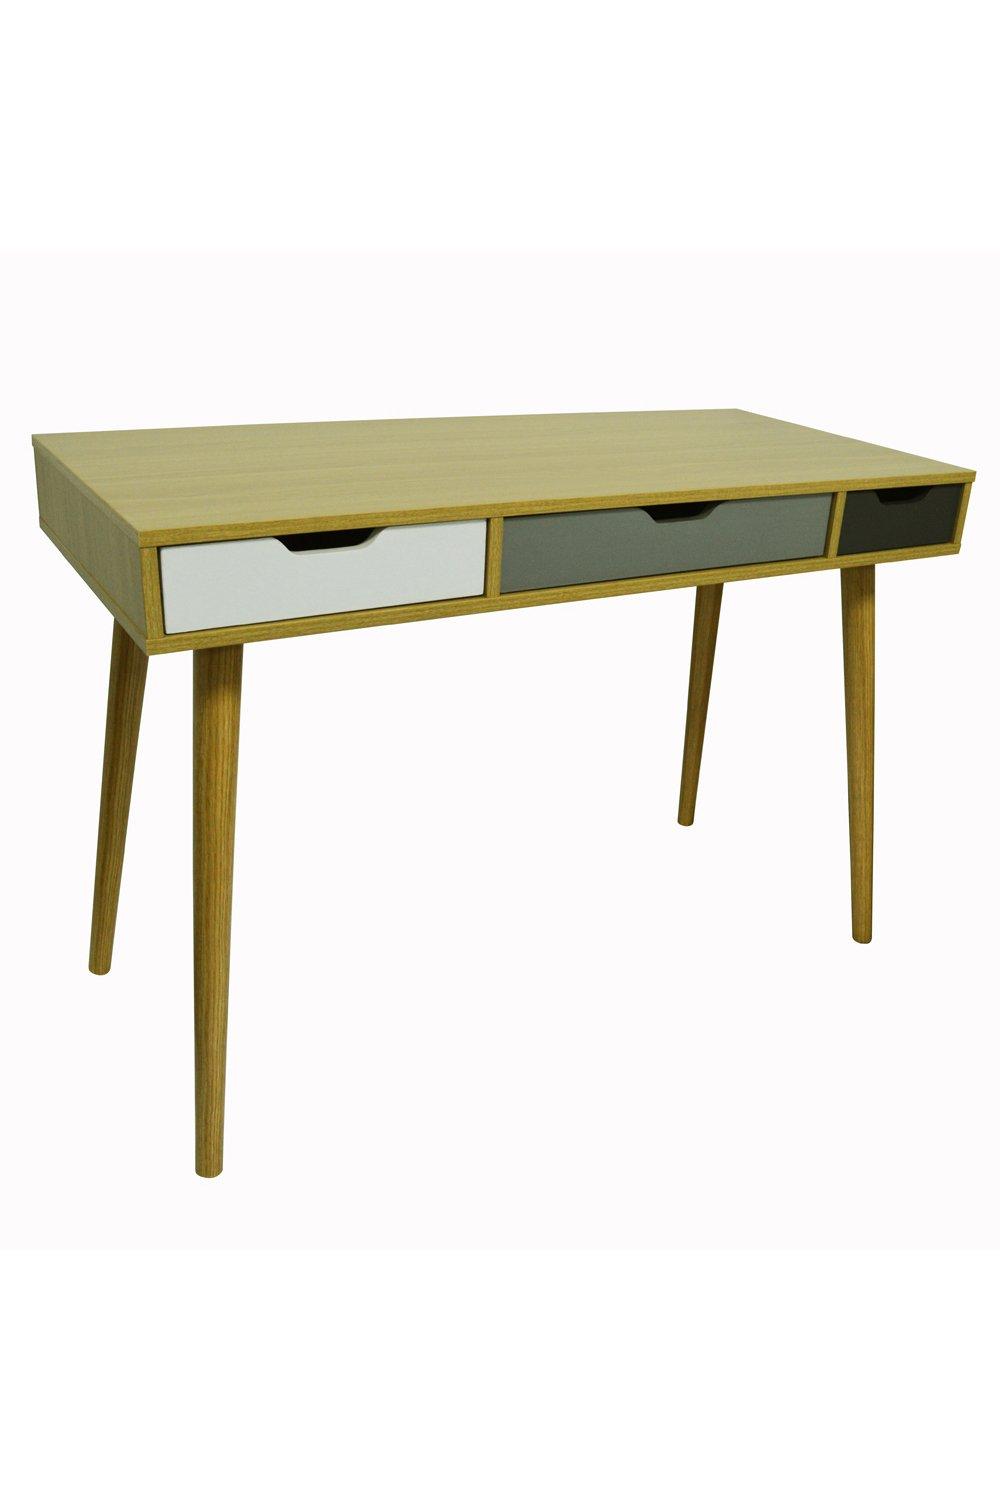 'Industrial' - 2 Drawer Office Computer Desk  Dressing Table - Beech  Multicoloured